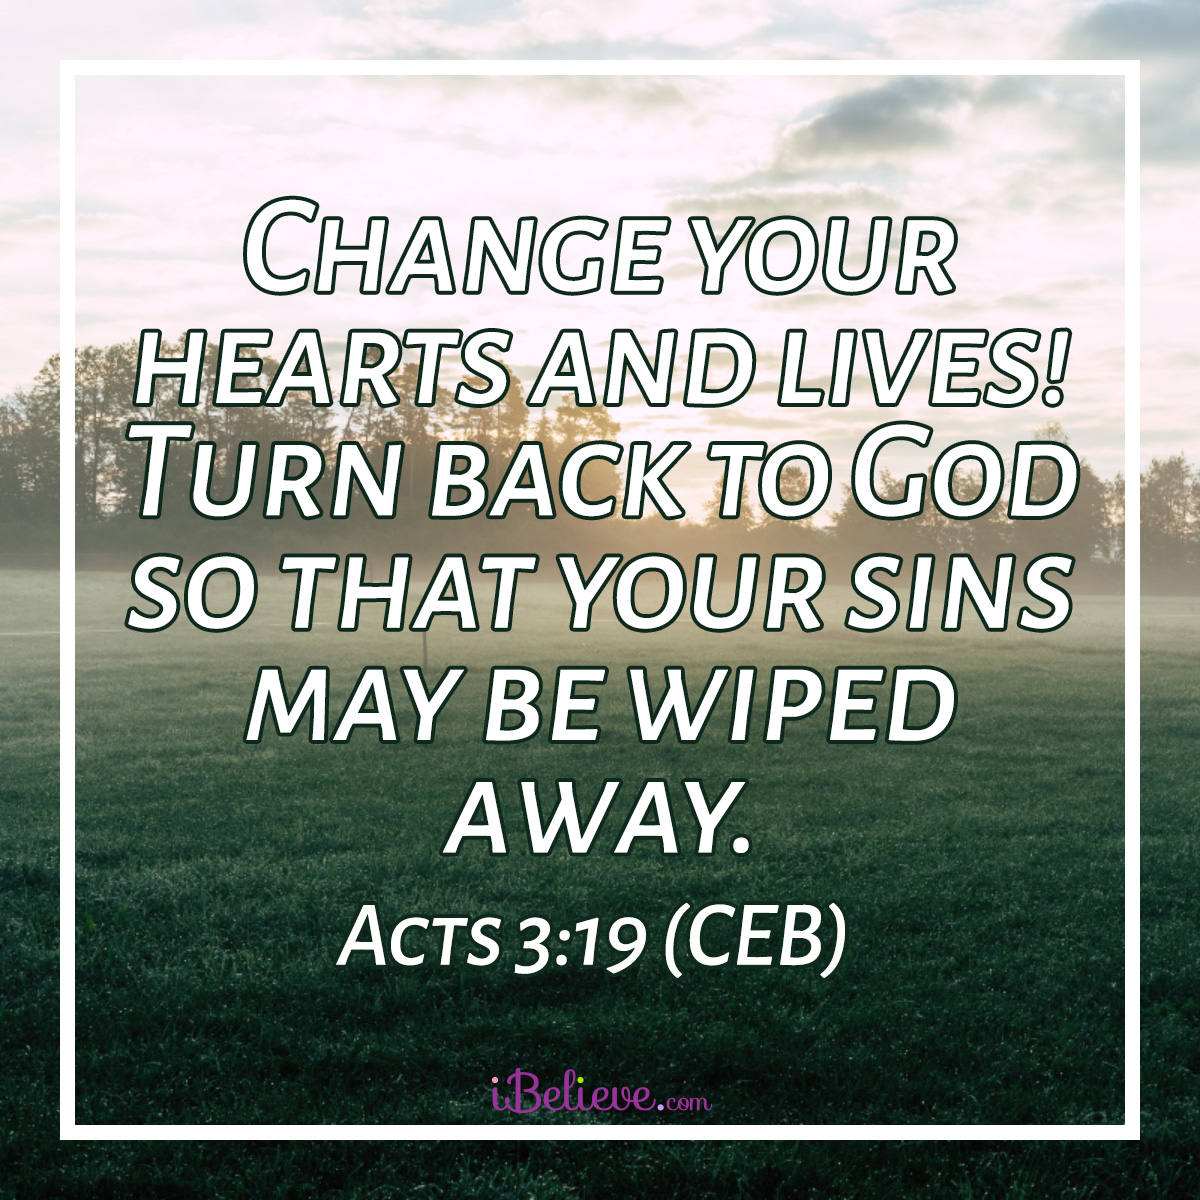 Acts 3:19, inspirational image